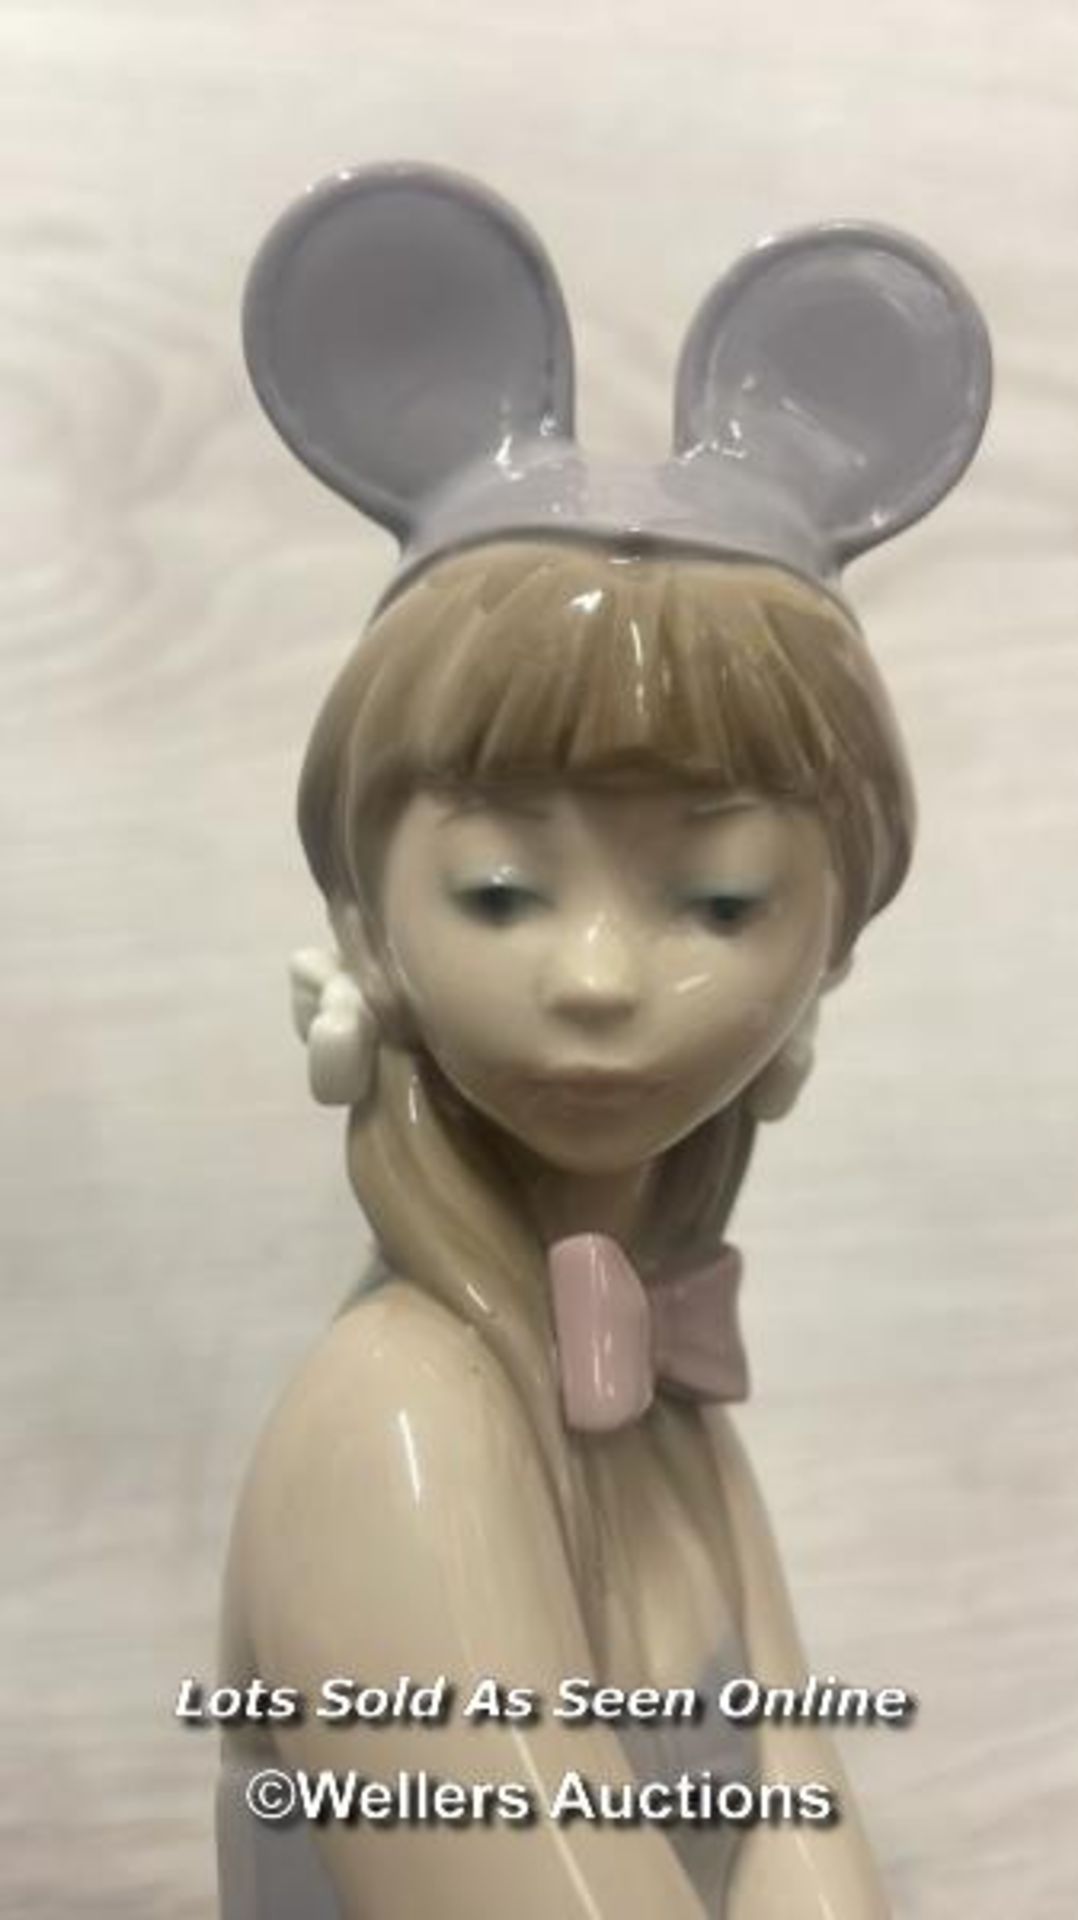 A RETIRED LLADRO FIGURE OF A SEATED GIRL DRESSED AS A MOUSE NO. 5162 'MINDY', 25CM HIGH, OVERALL - Image 3 of 6